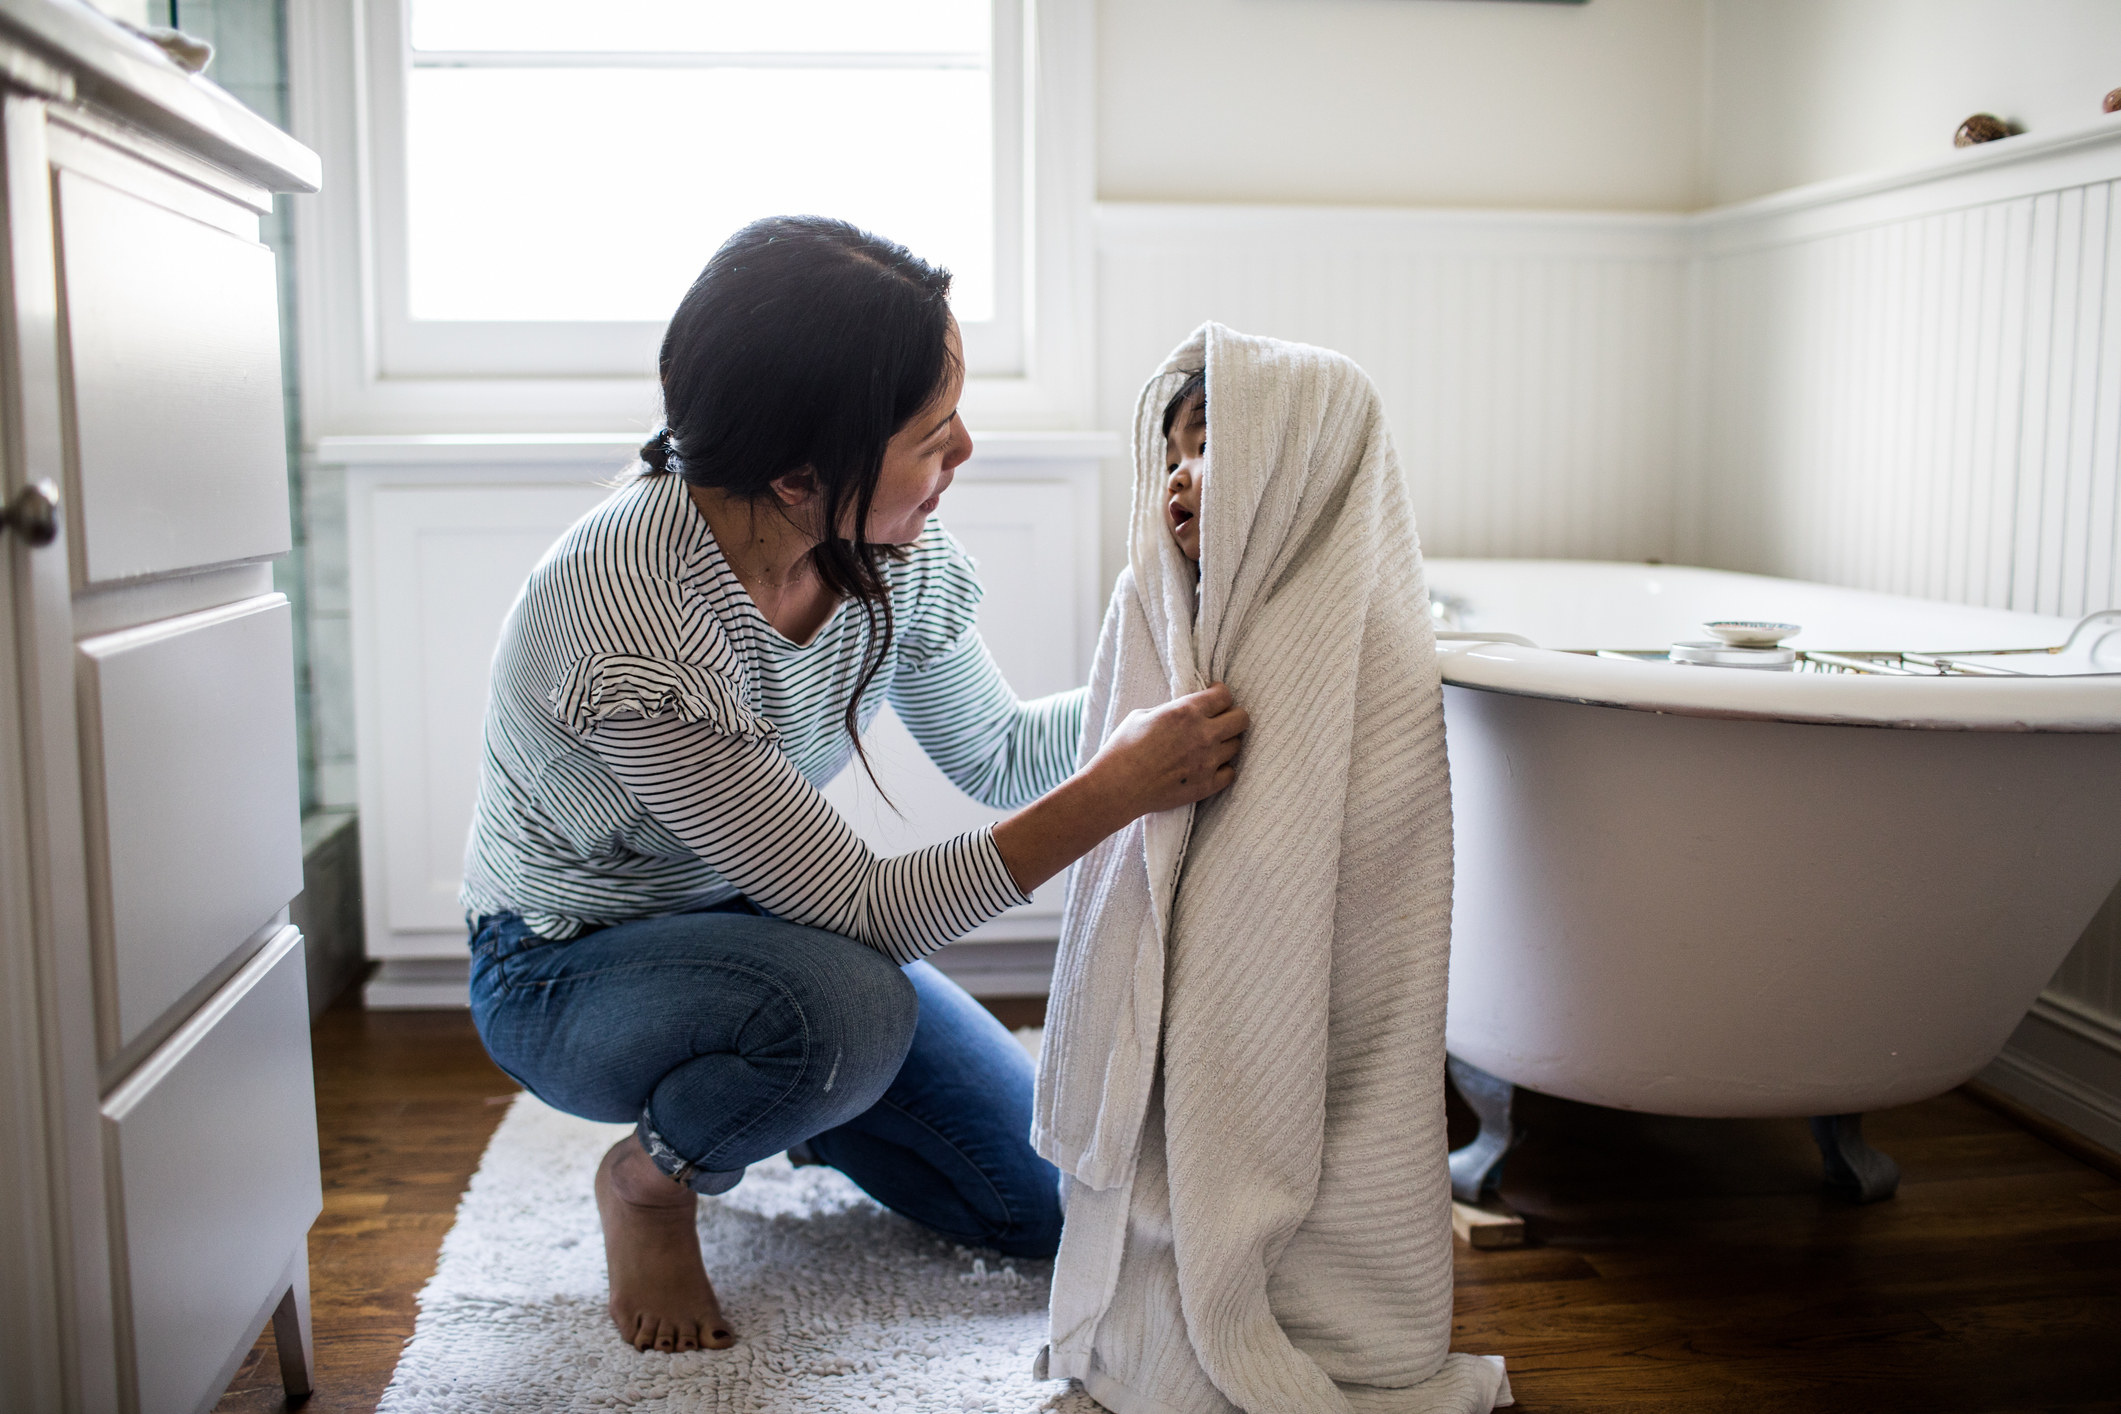 A woman drying a small child out of the bath